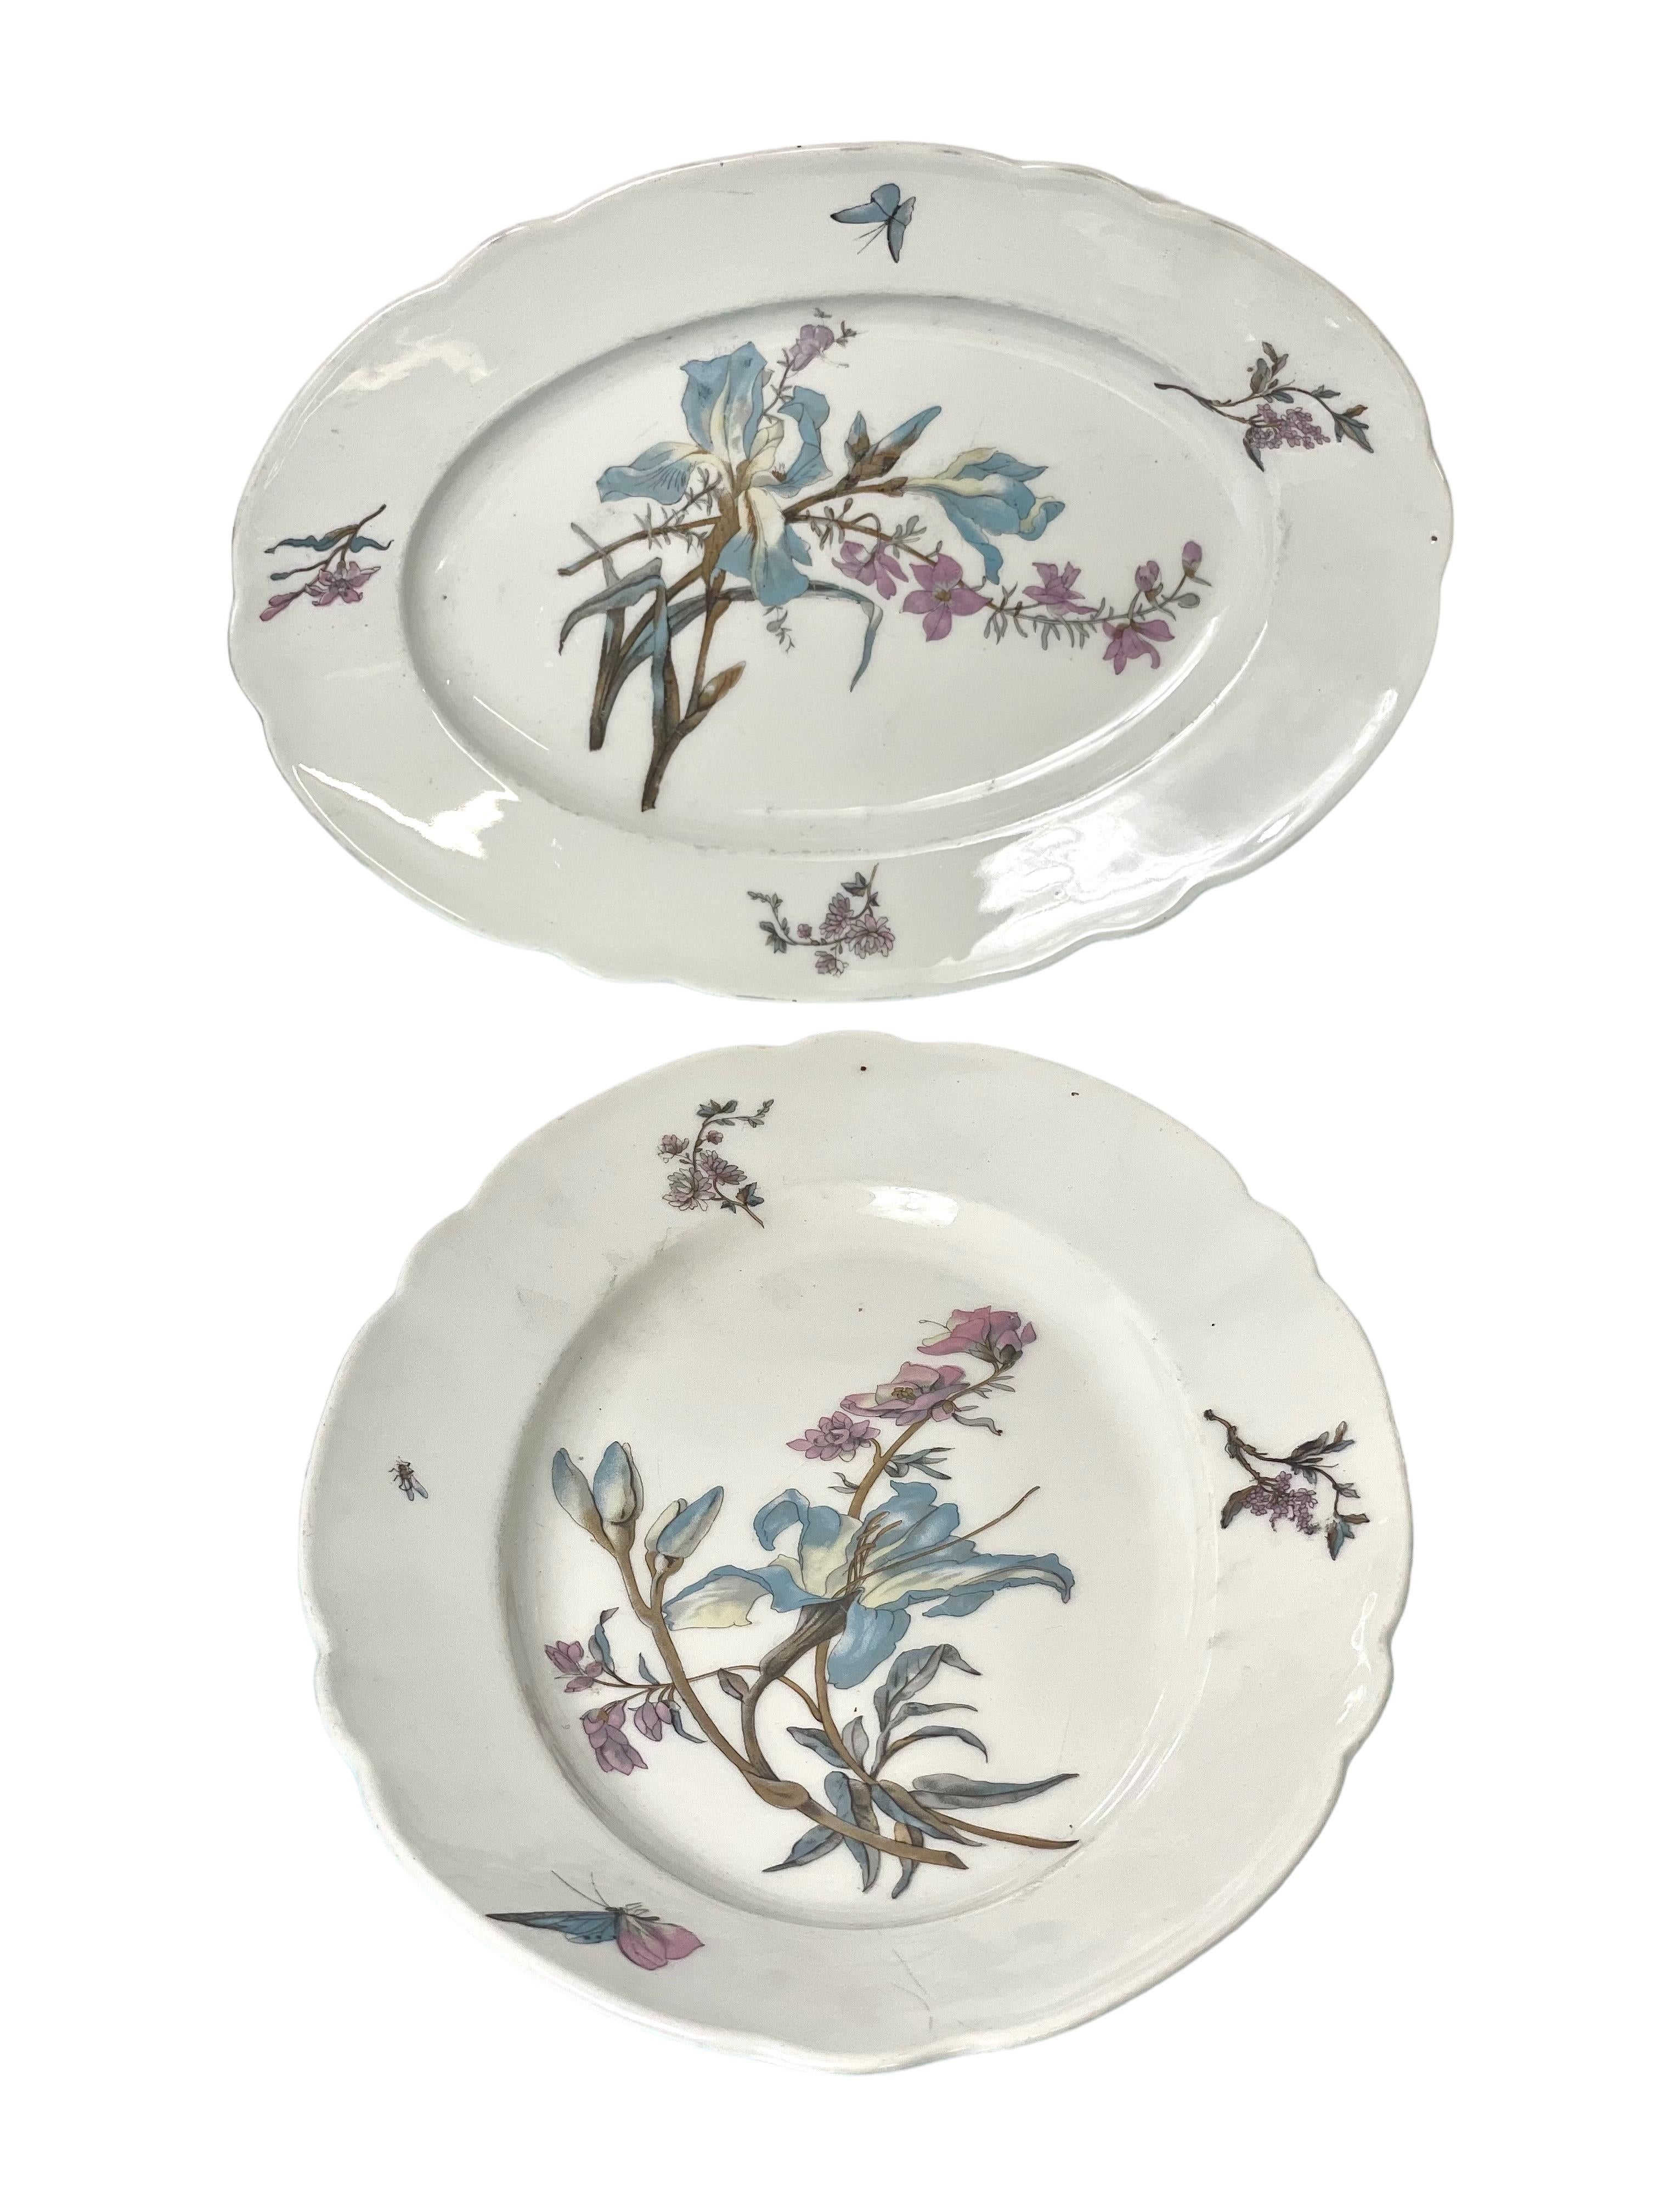 102-Piece Porcelain Dinner Service with Flowers and Butterflies 10